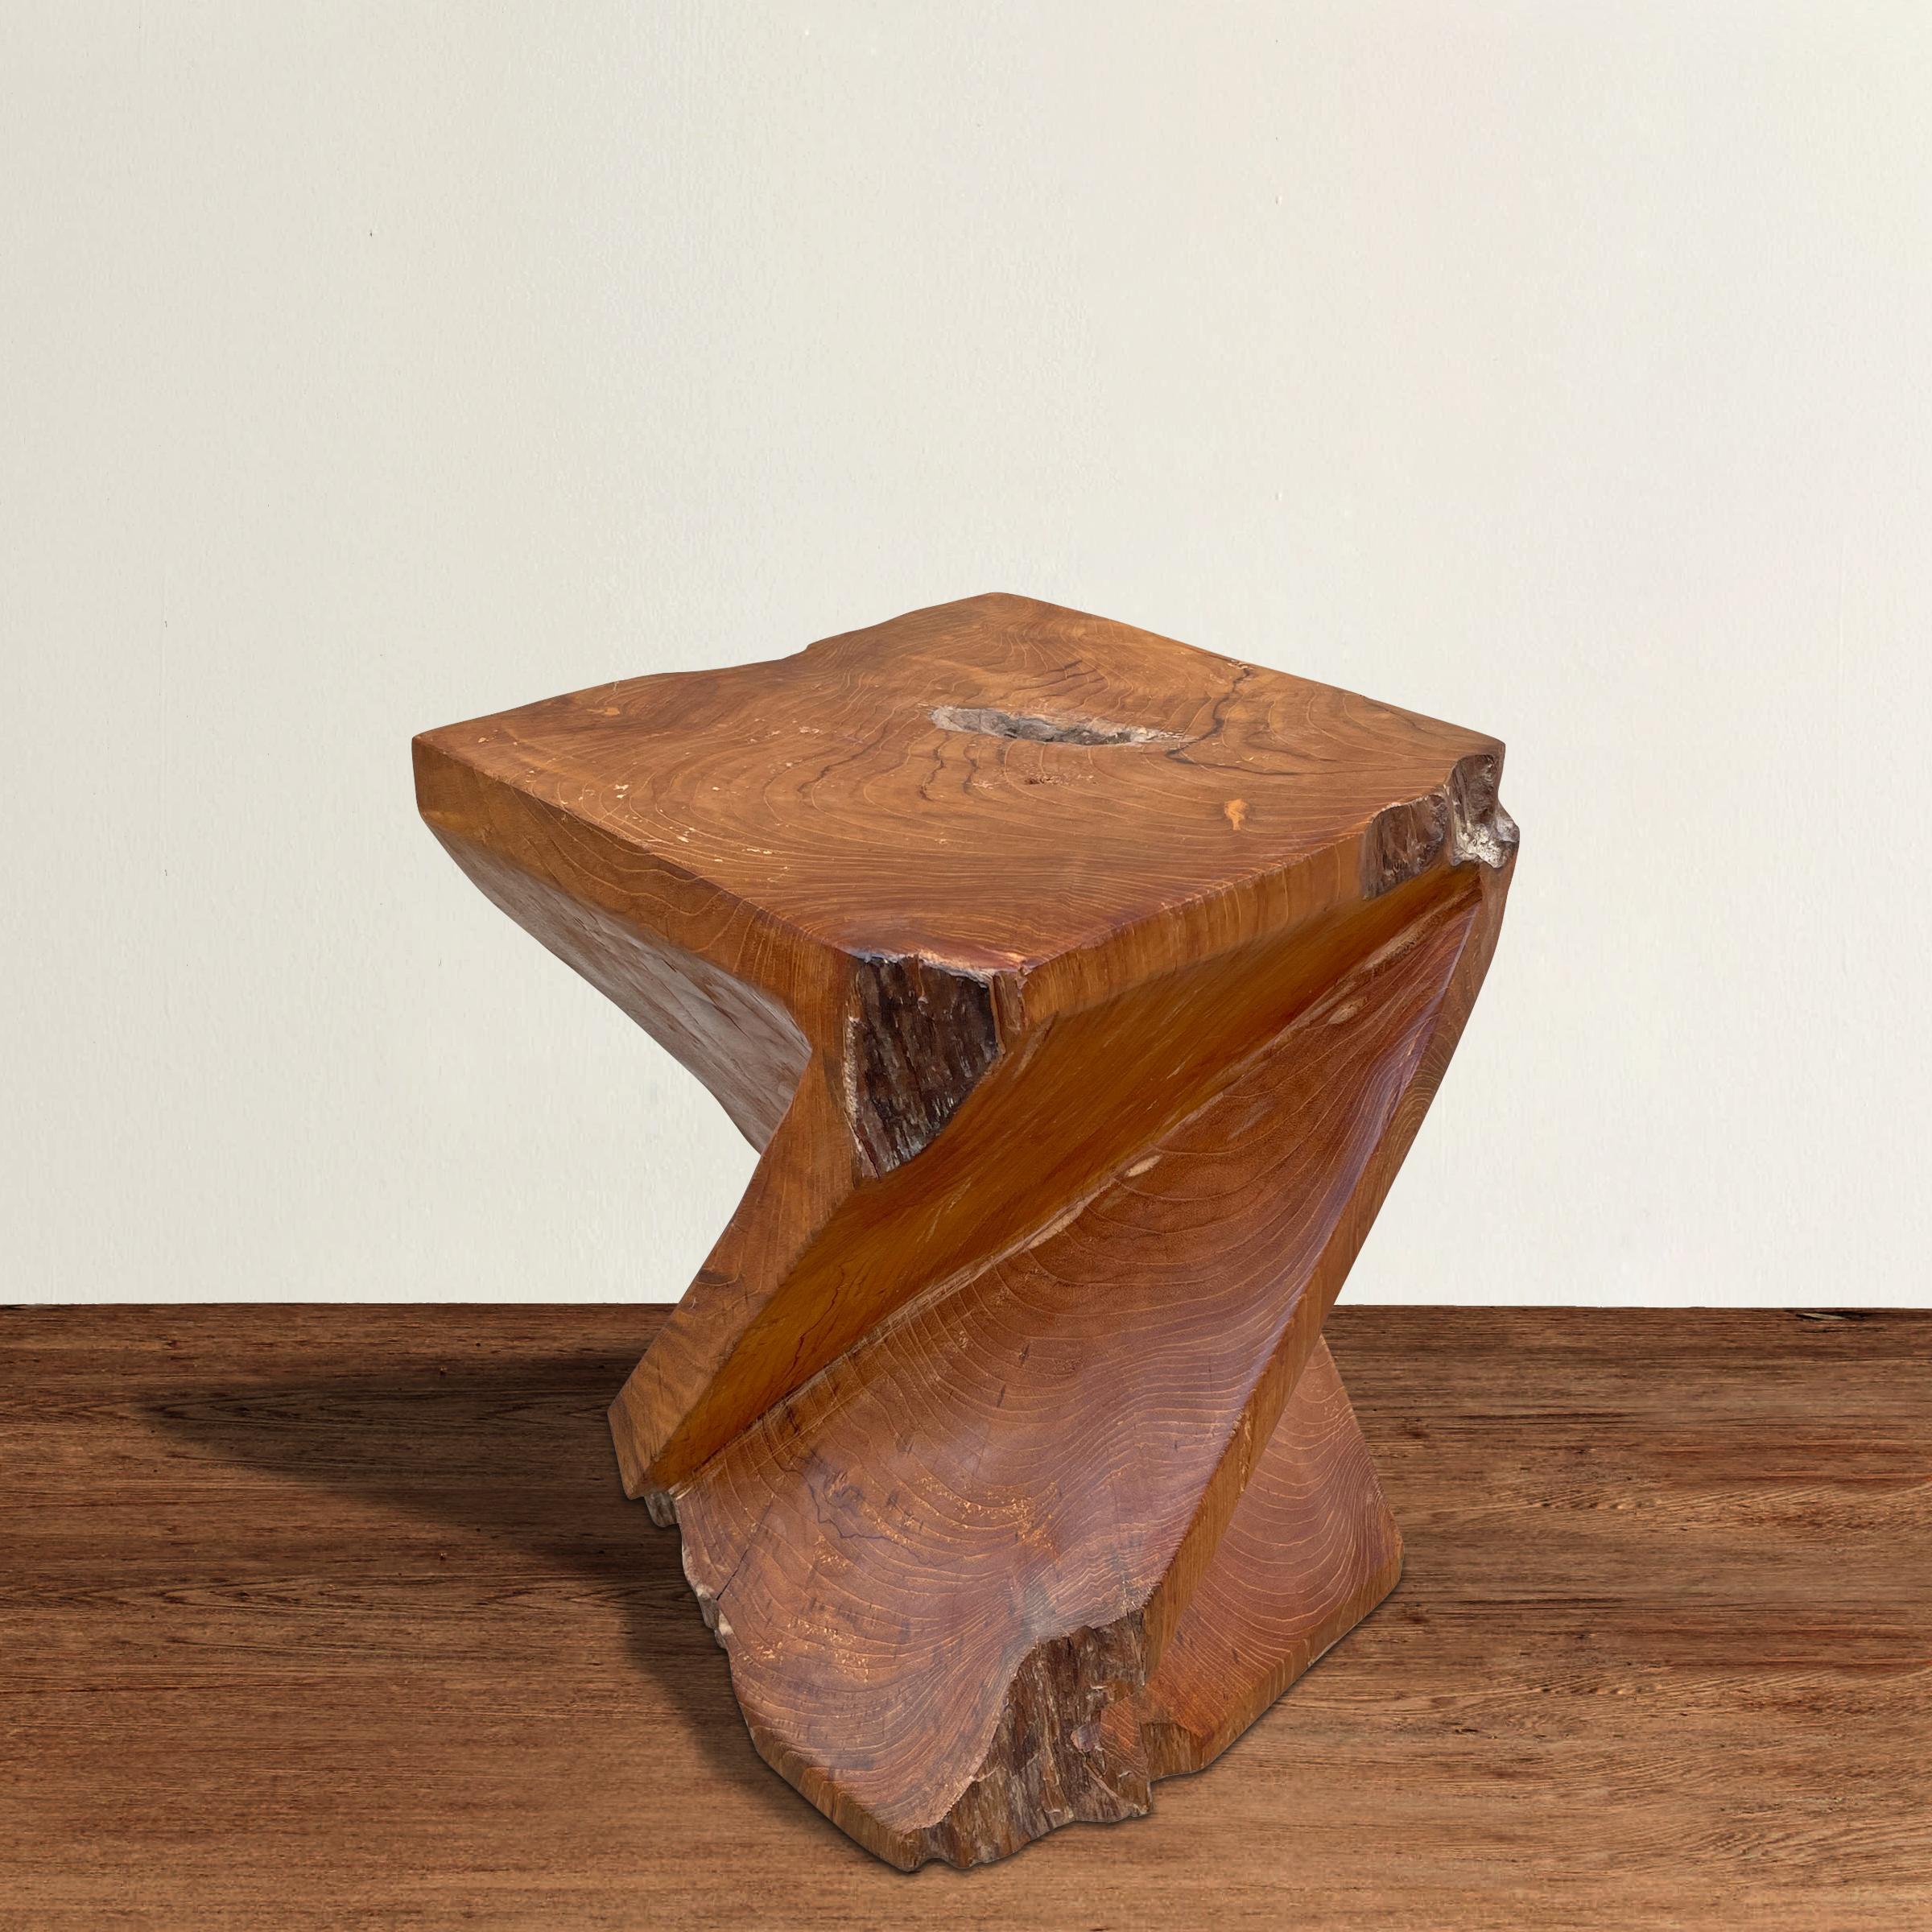 A bold side table with a 'Z' form, and carved from one piece of teakwood with natural live edges.